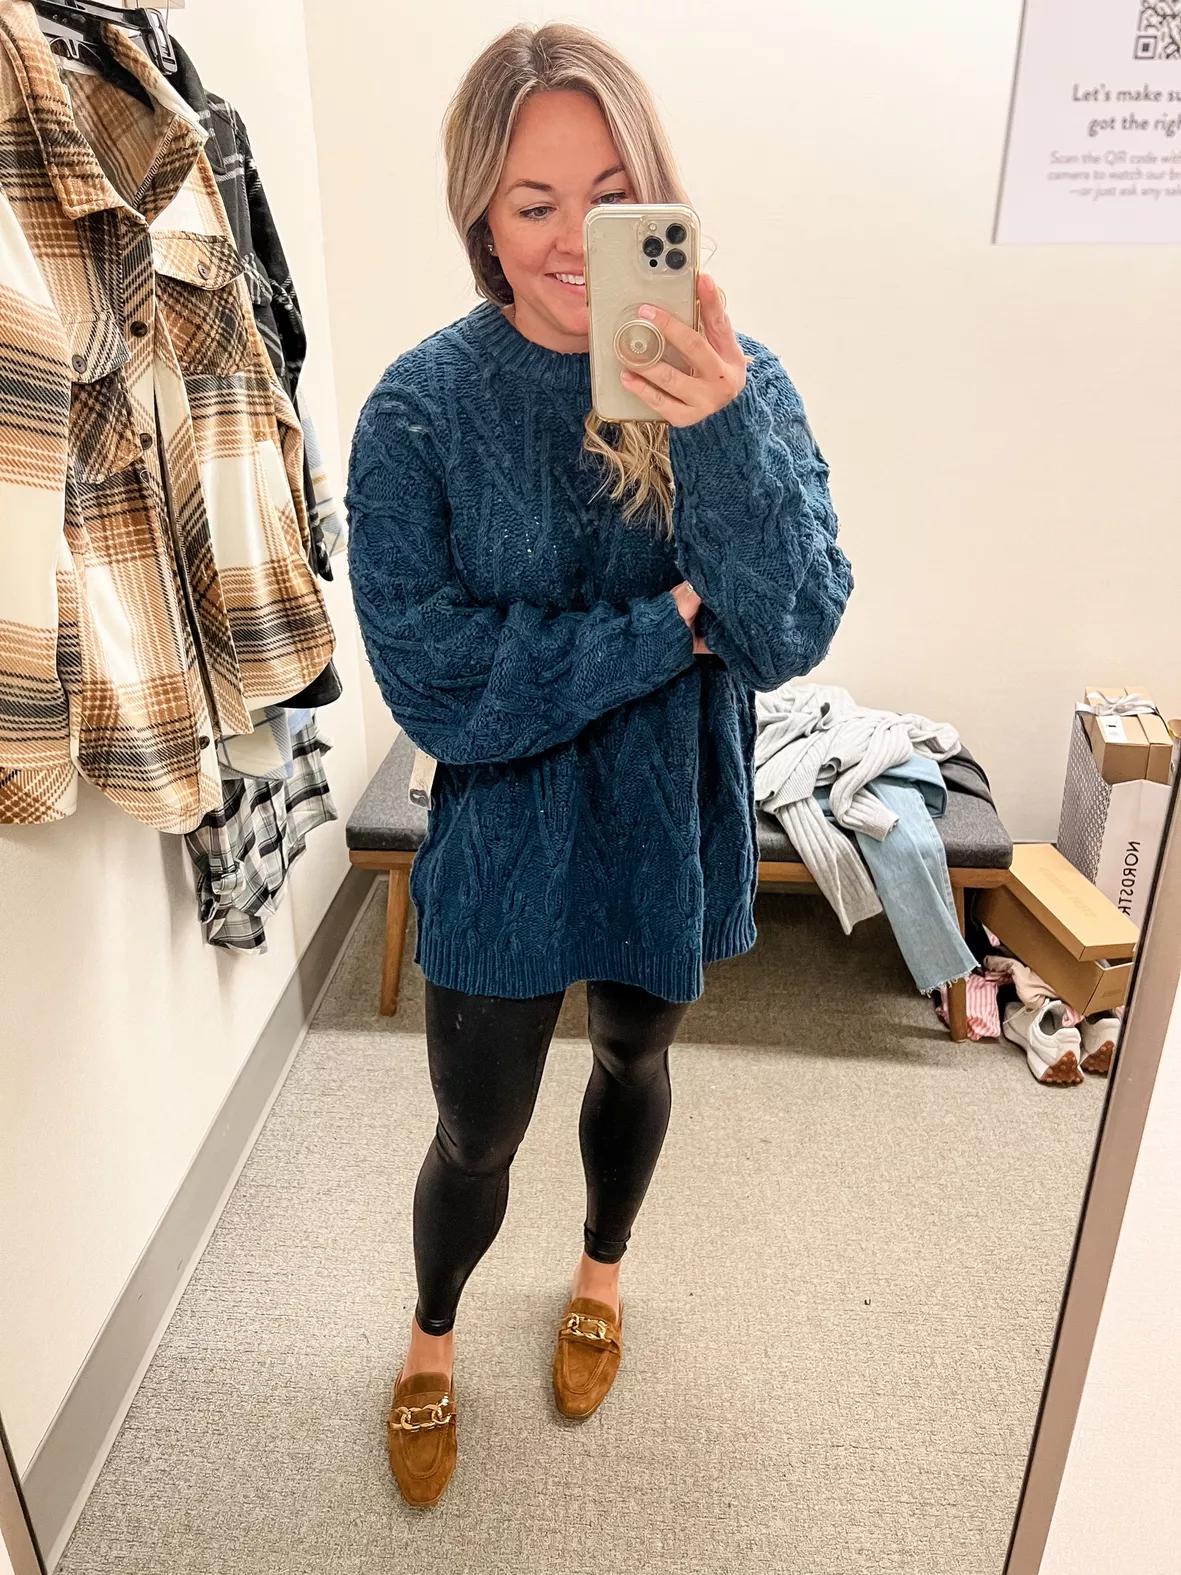 Winter uniform: free people dupe tunic (going on 2 years), spanx